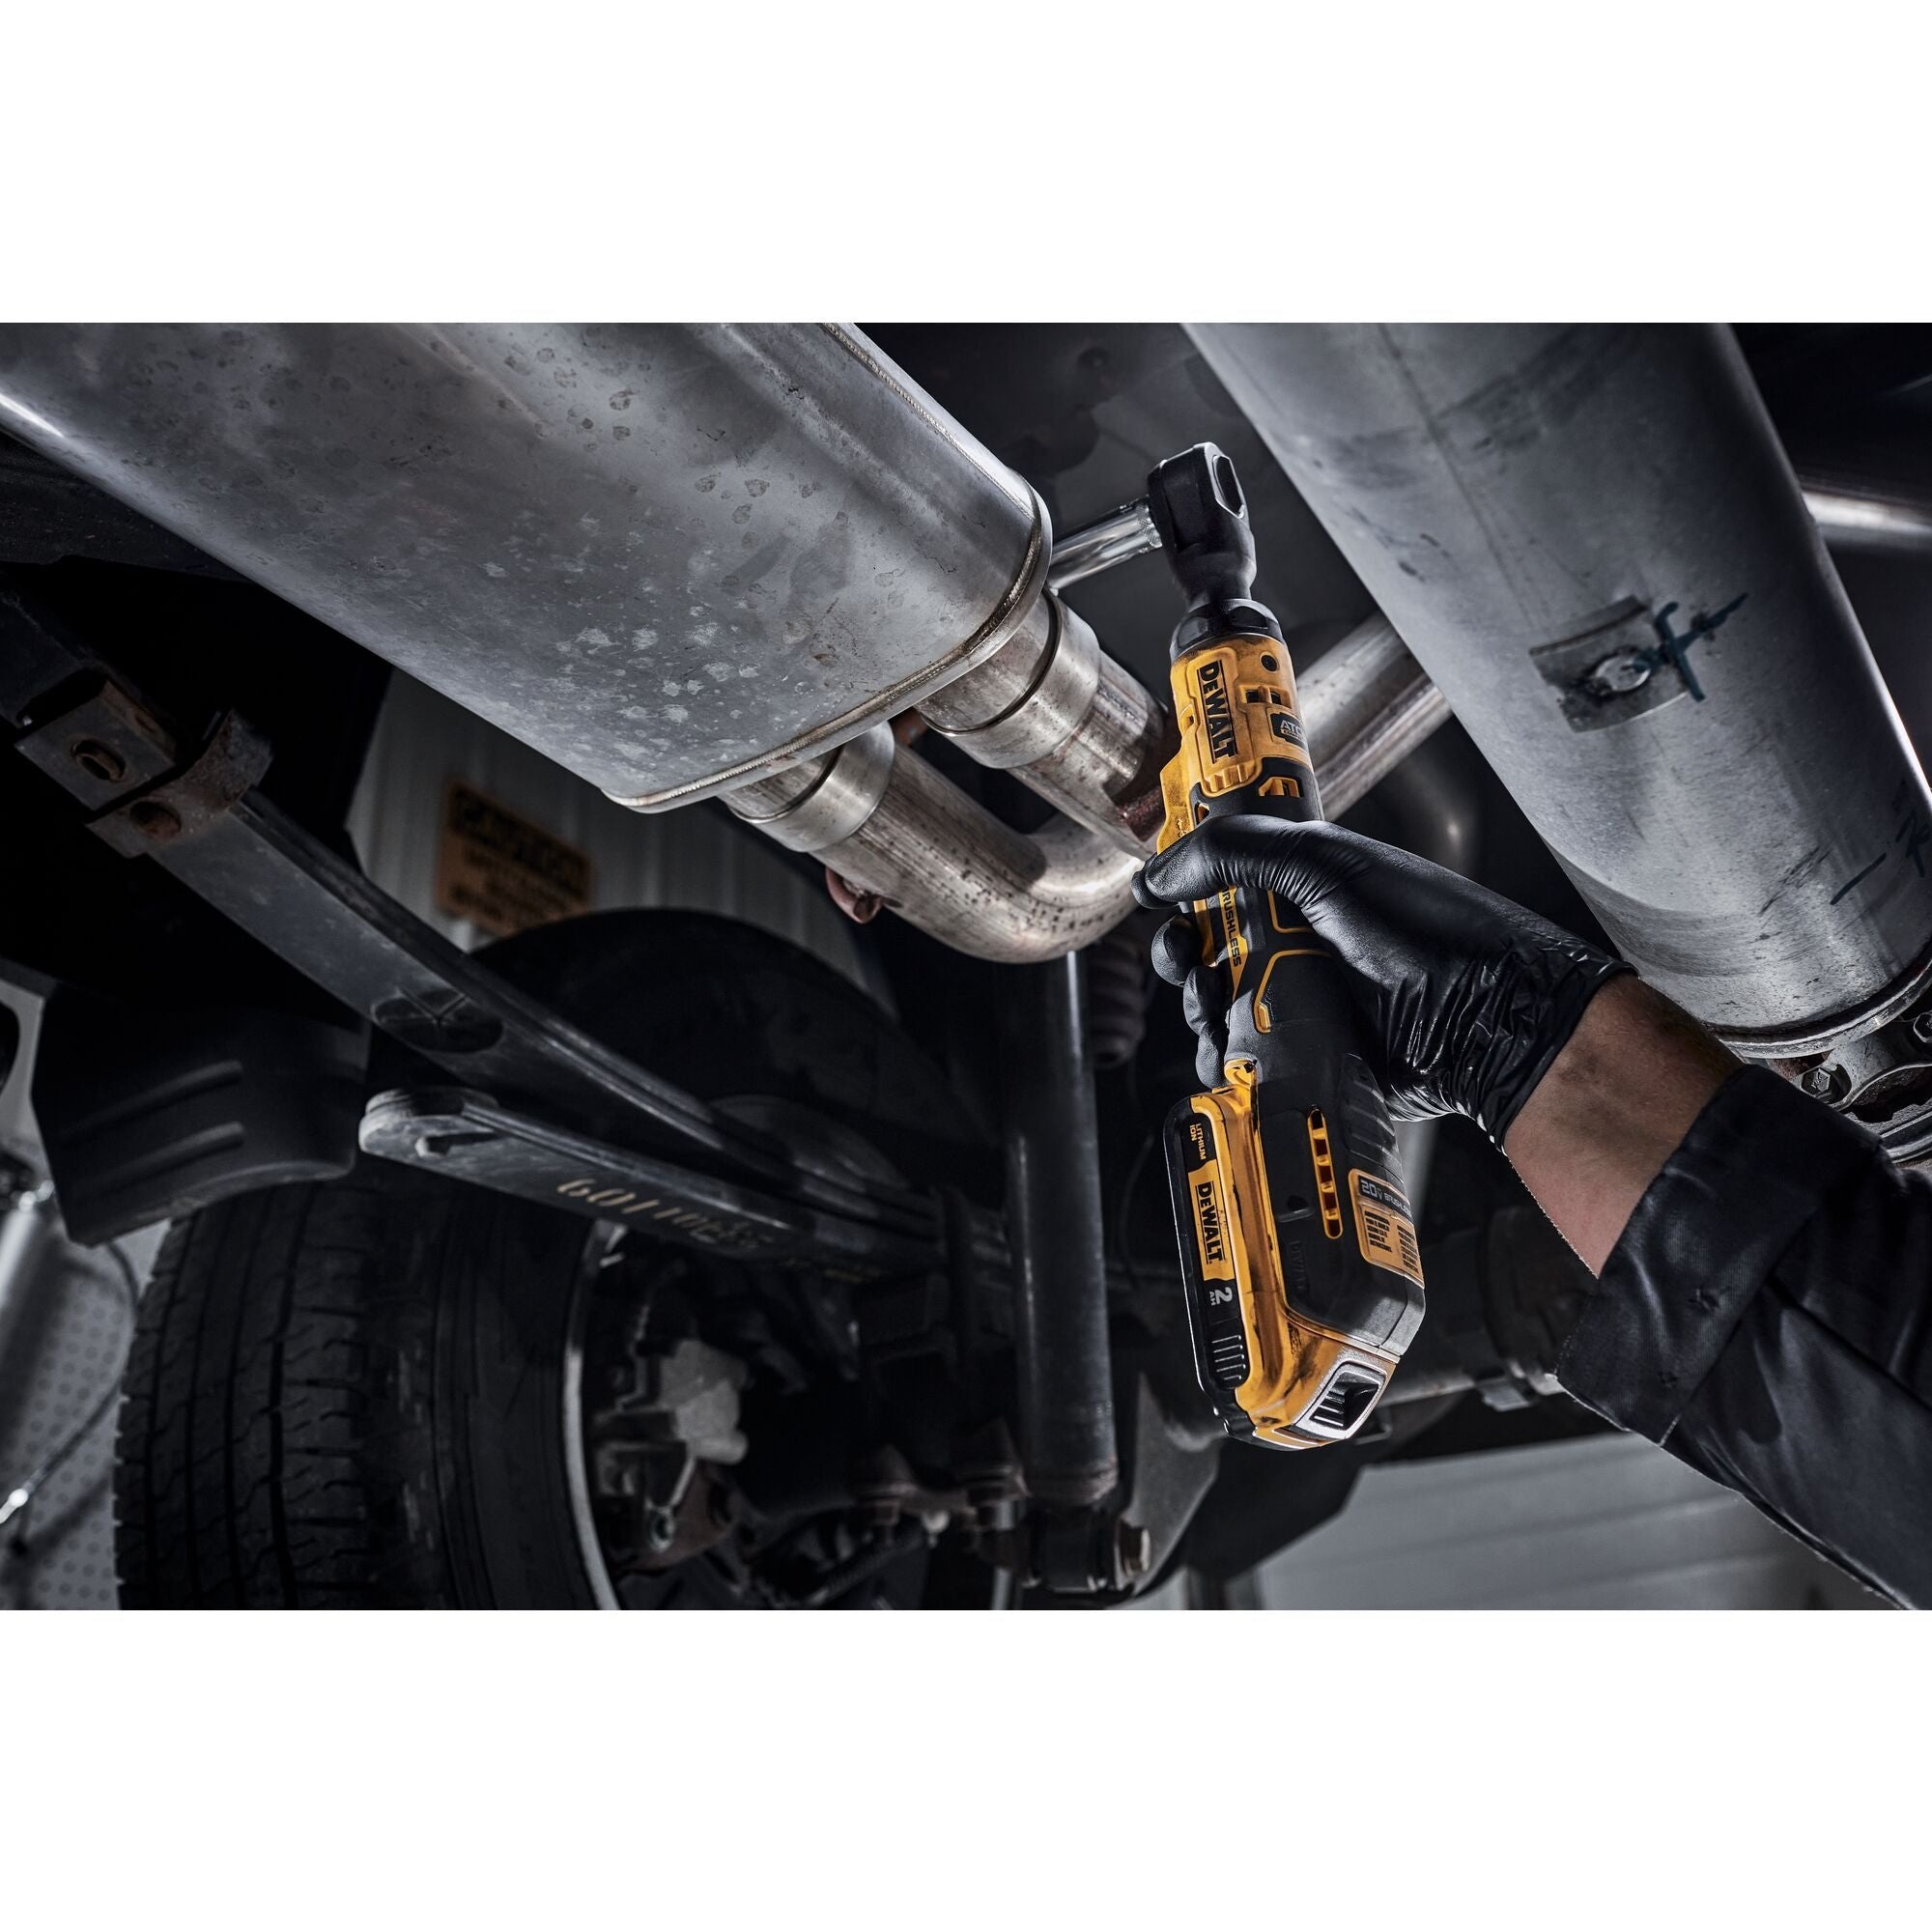 Dewalt DCF513B ATOMIC COMPACT SERIES™ 20V MAX* Brushless 3/8 in. Ratchet (Tool Only)